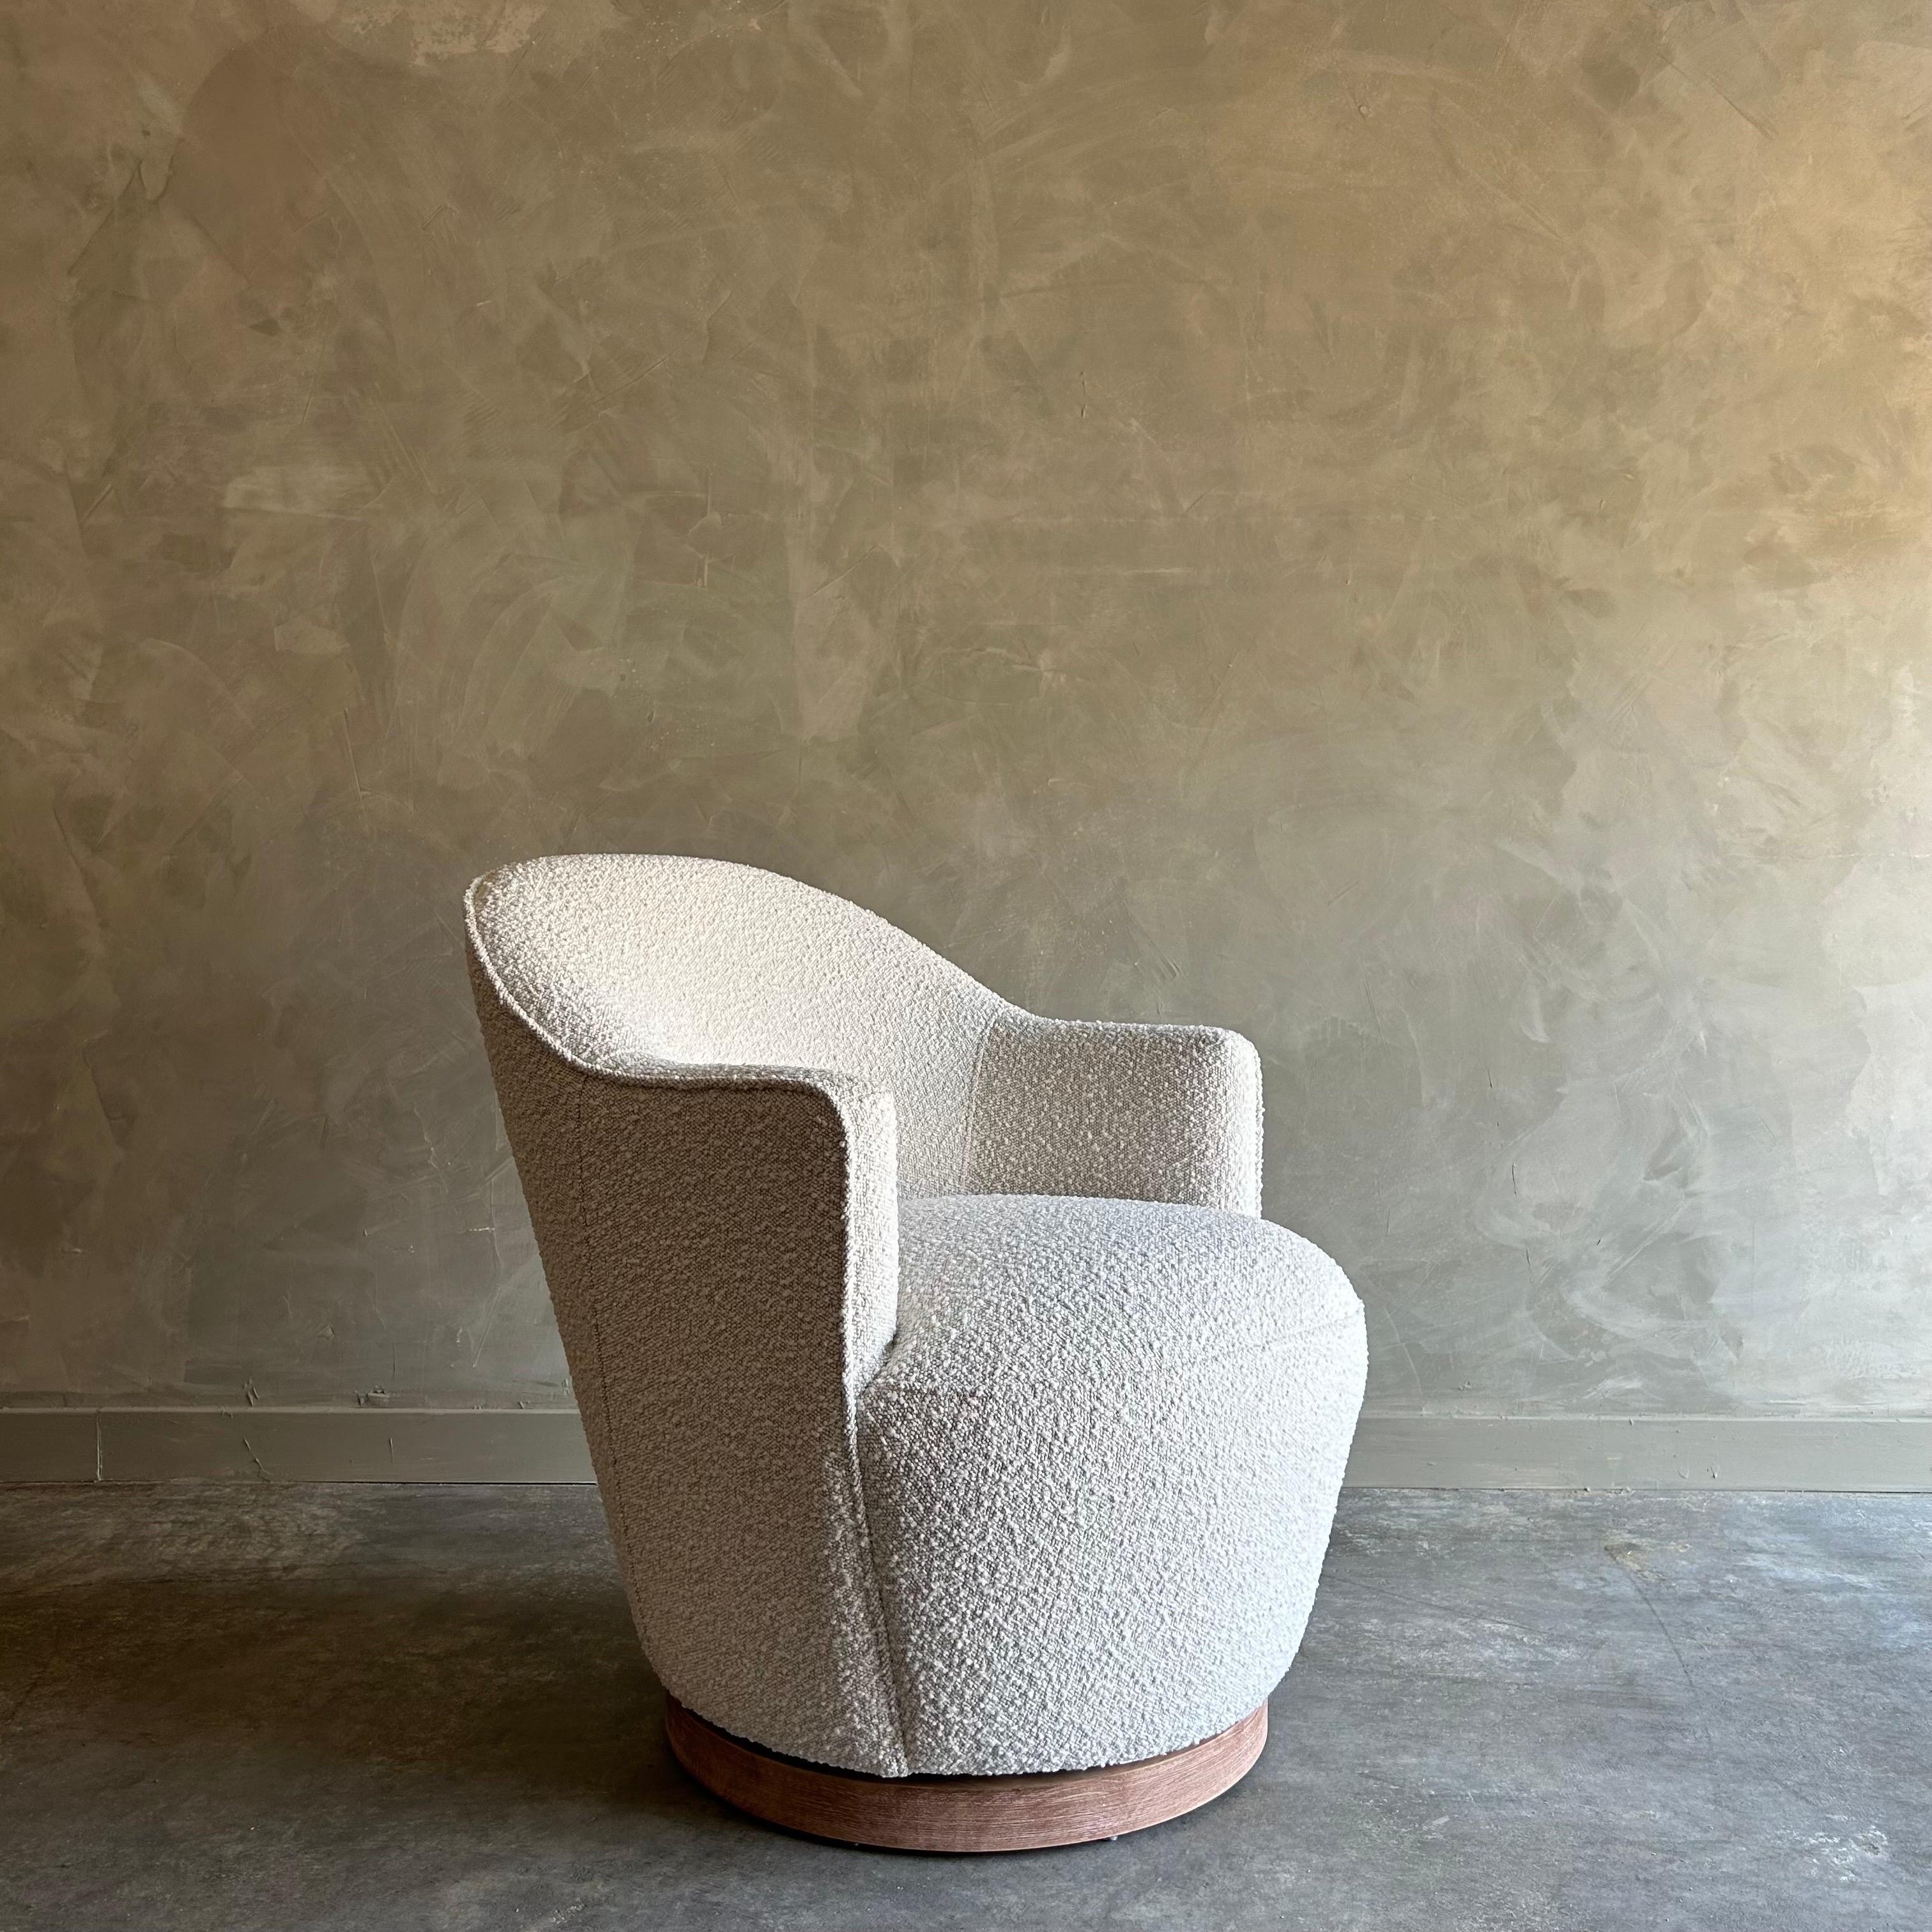 Boucle Swivel Chair 
Size: 28”w x 30”d x 31”h. 
SH: 18”. 
SD:21”. 
AH:24”
Petite in size, this swivel chair is both comfortable with a tight seat and tight back, giving it a more modern look.
The boucle is in ivory cream on a natural background.
The